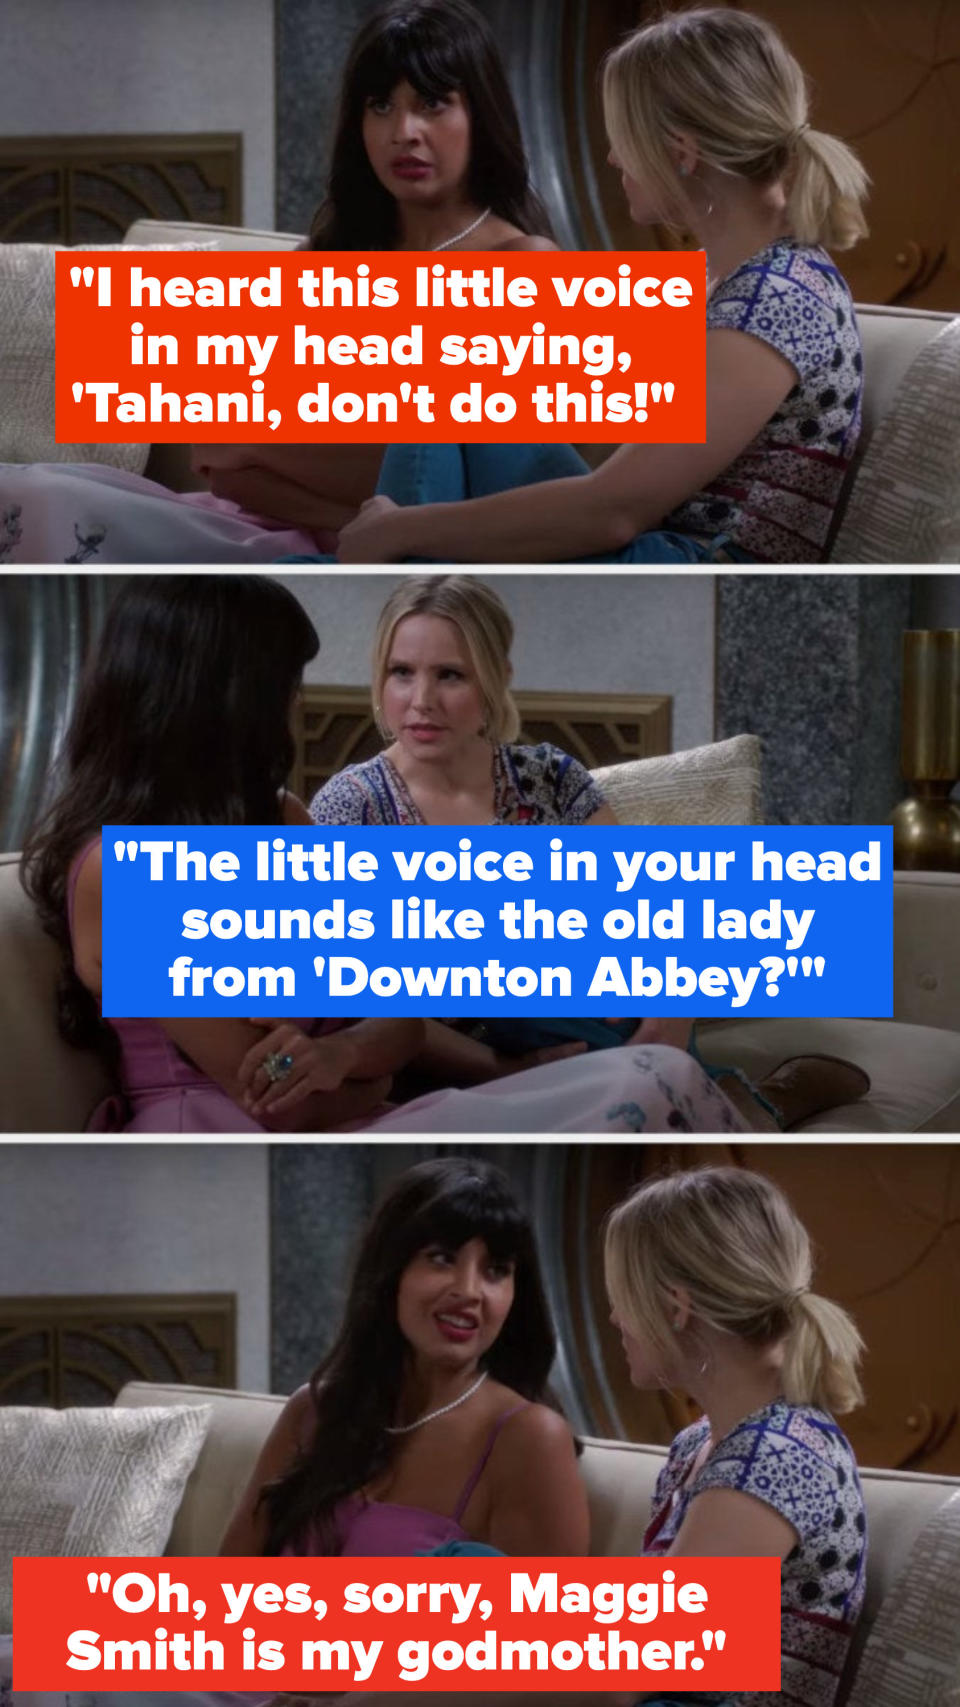 Tahani says, I heard this little voice in my head saying, 'Tahani, don't do this, Eleanor asks, The little voice in your head sounds like the old lady from Downton Abbey, and Tahani says, Oh, yes, sorry, Maggie Smith is my godmother